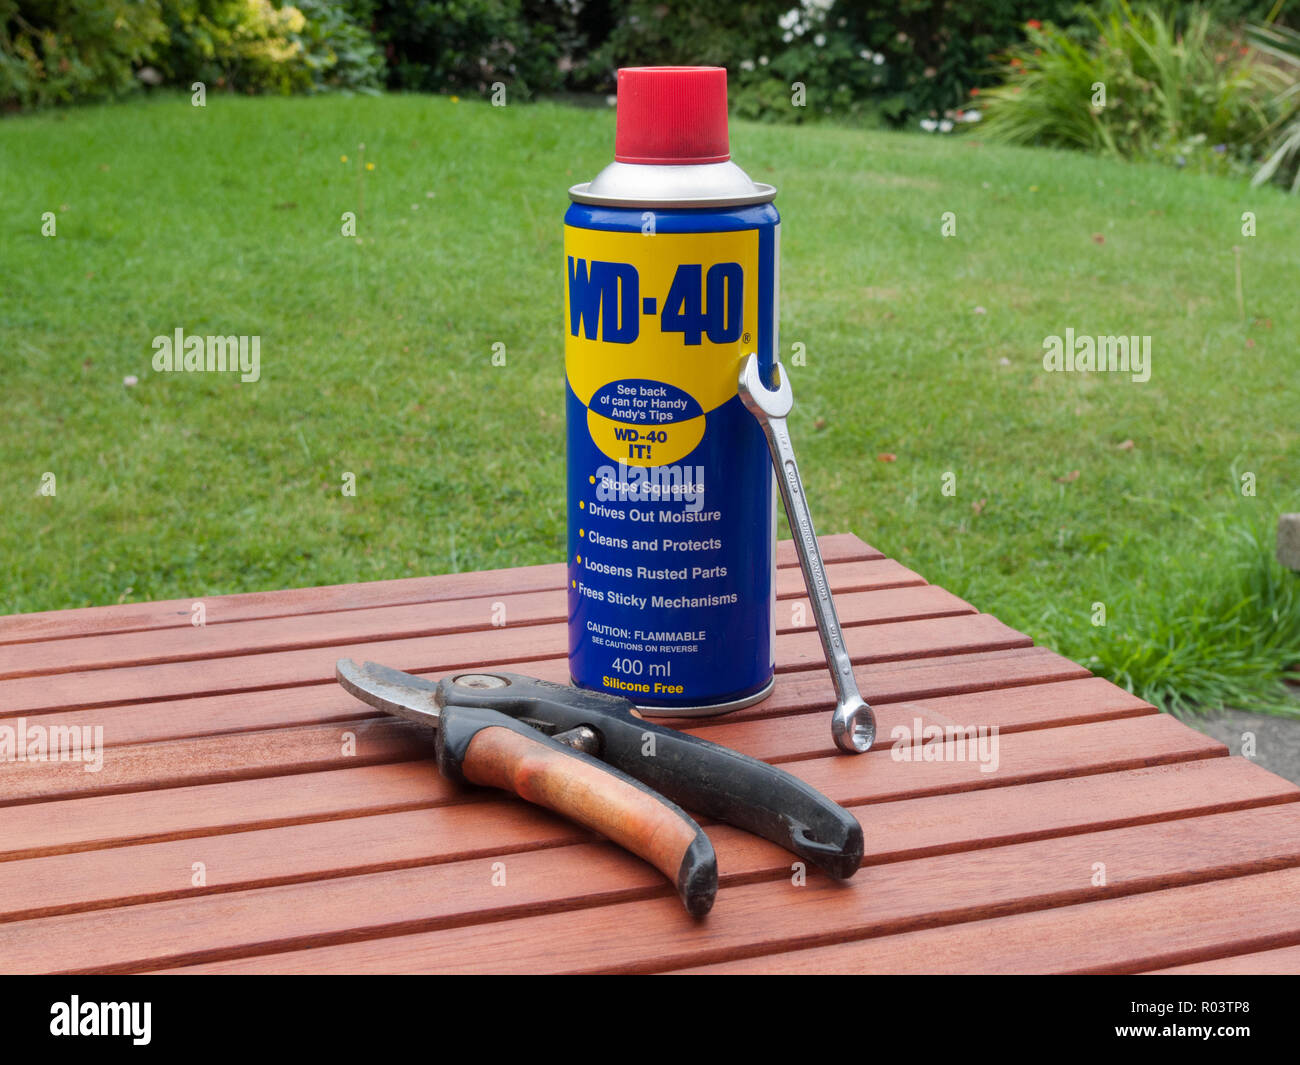 Aerosol Can of WD-40 Lubricant Spray With Secateurs and a Spanner, UK Stock Photo